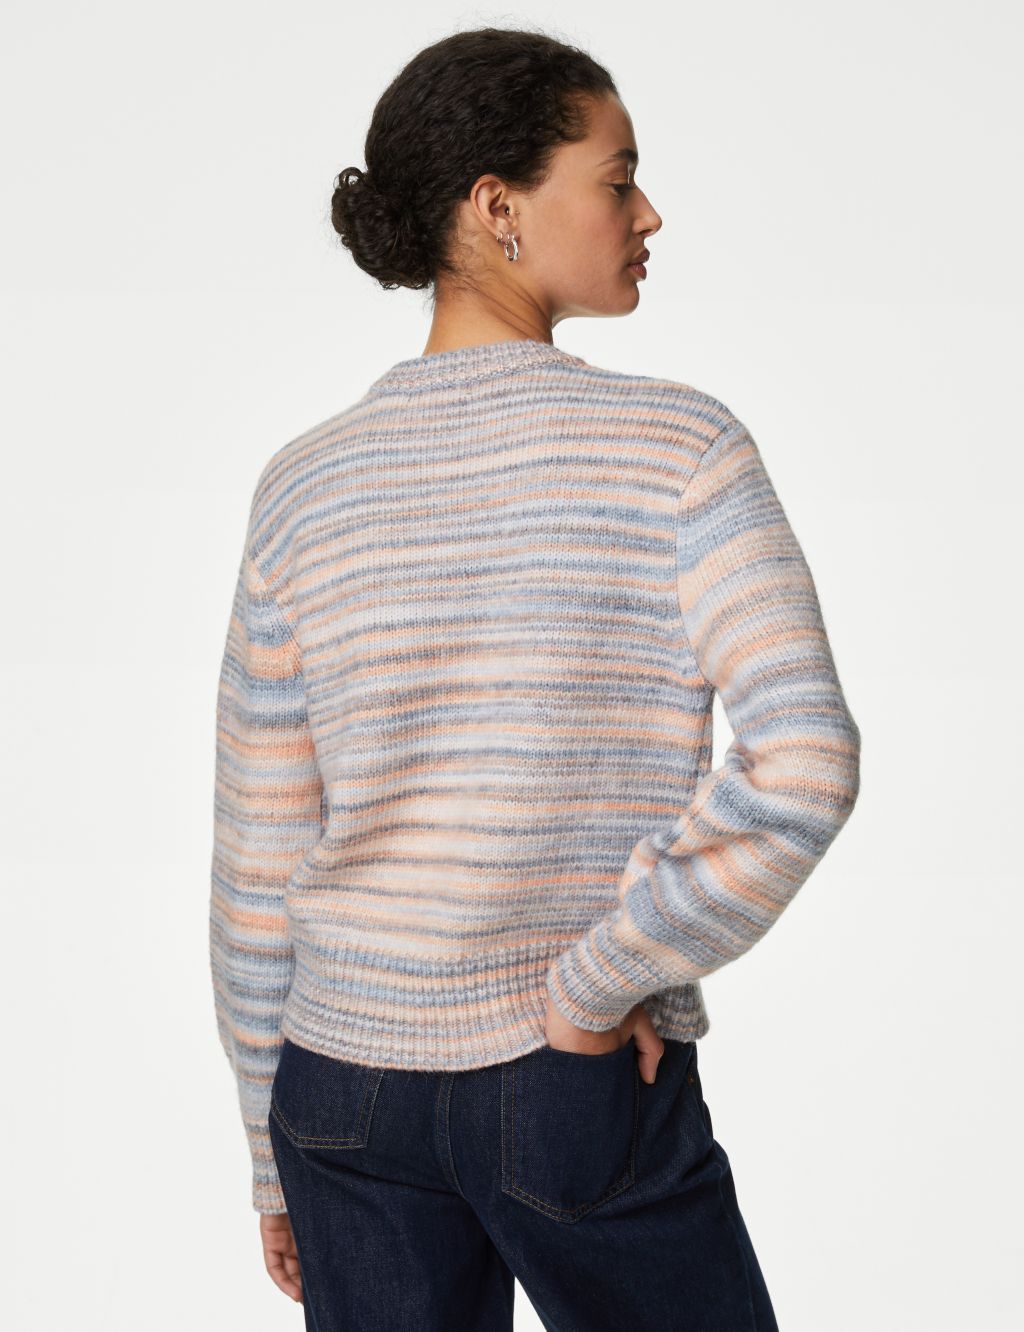 Space Dyed Crew Neck Jumper with Wool image 5